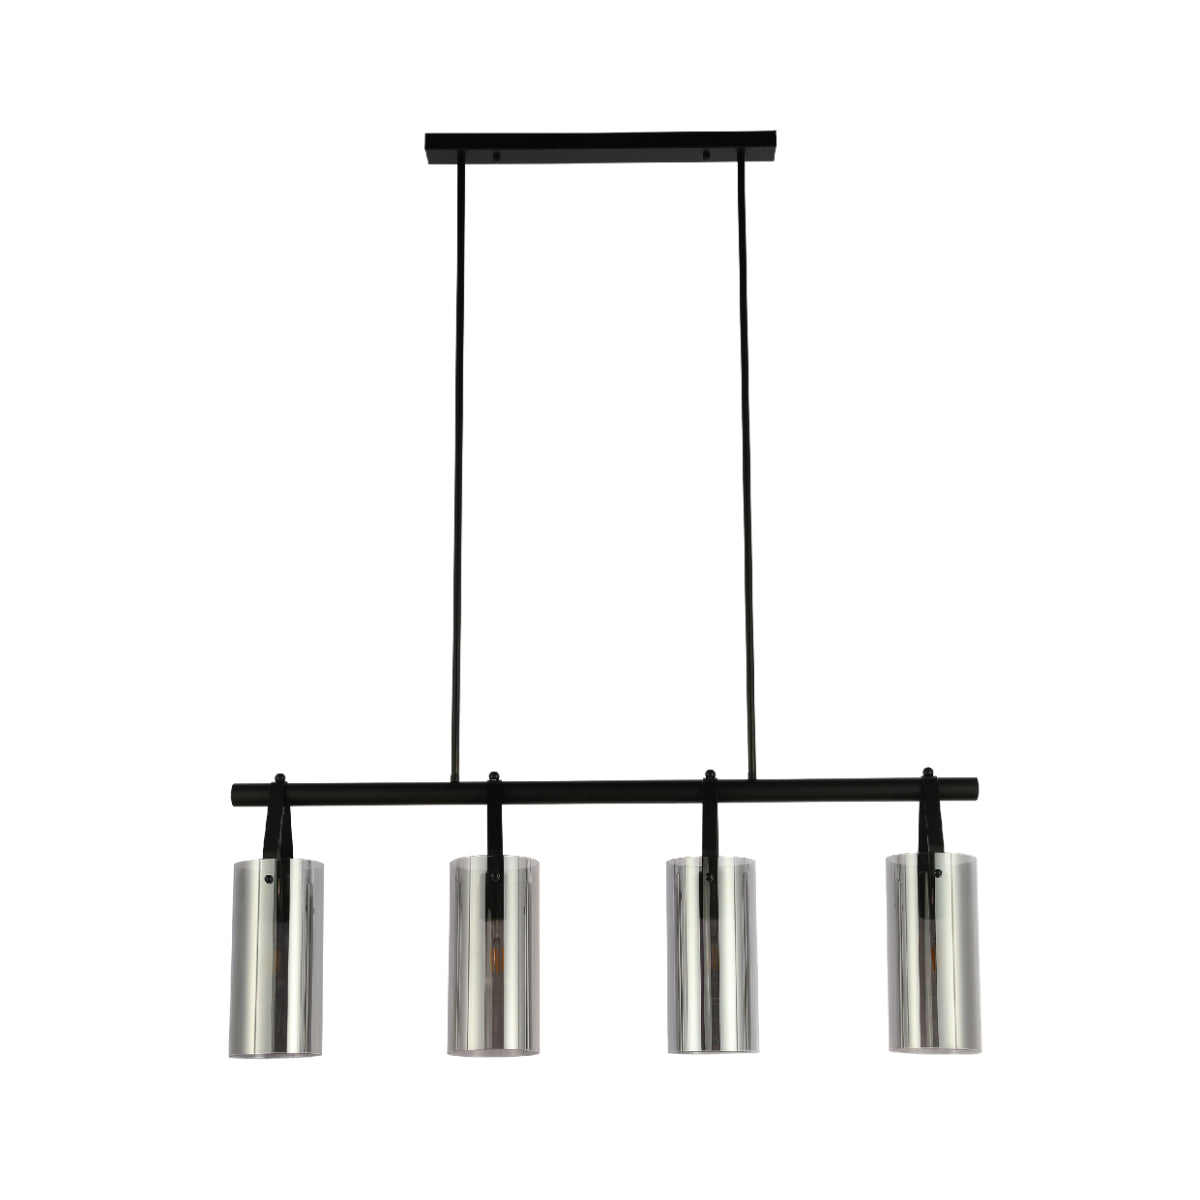 Main image of Smoky Glass Chandelier - Linear & Round Variants